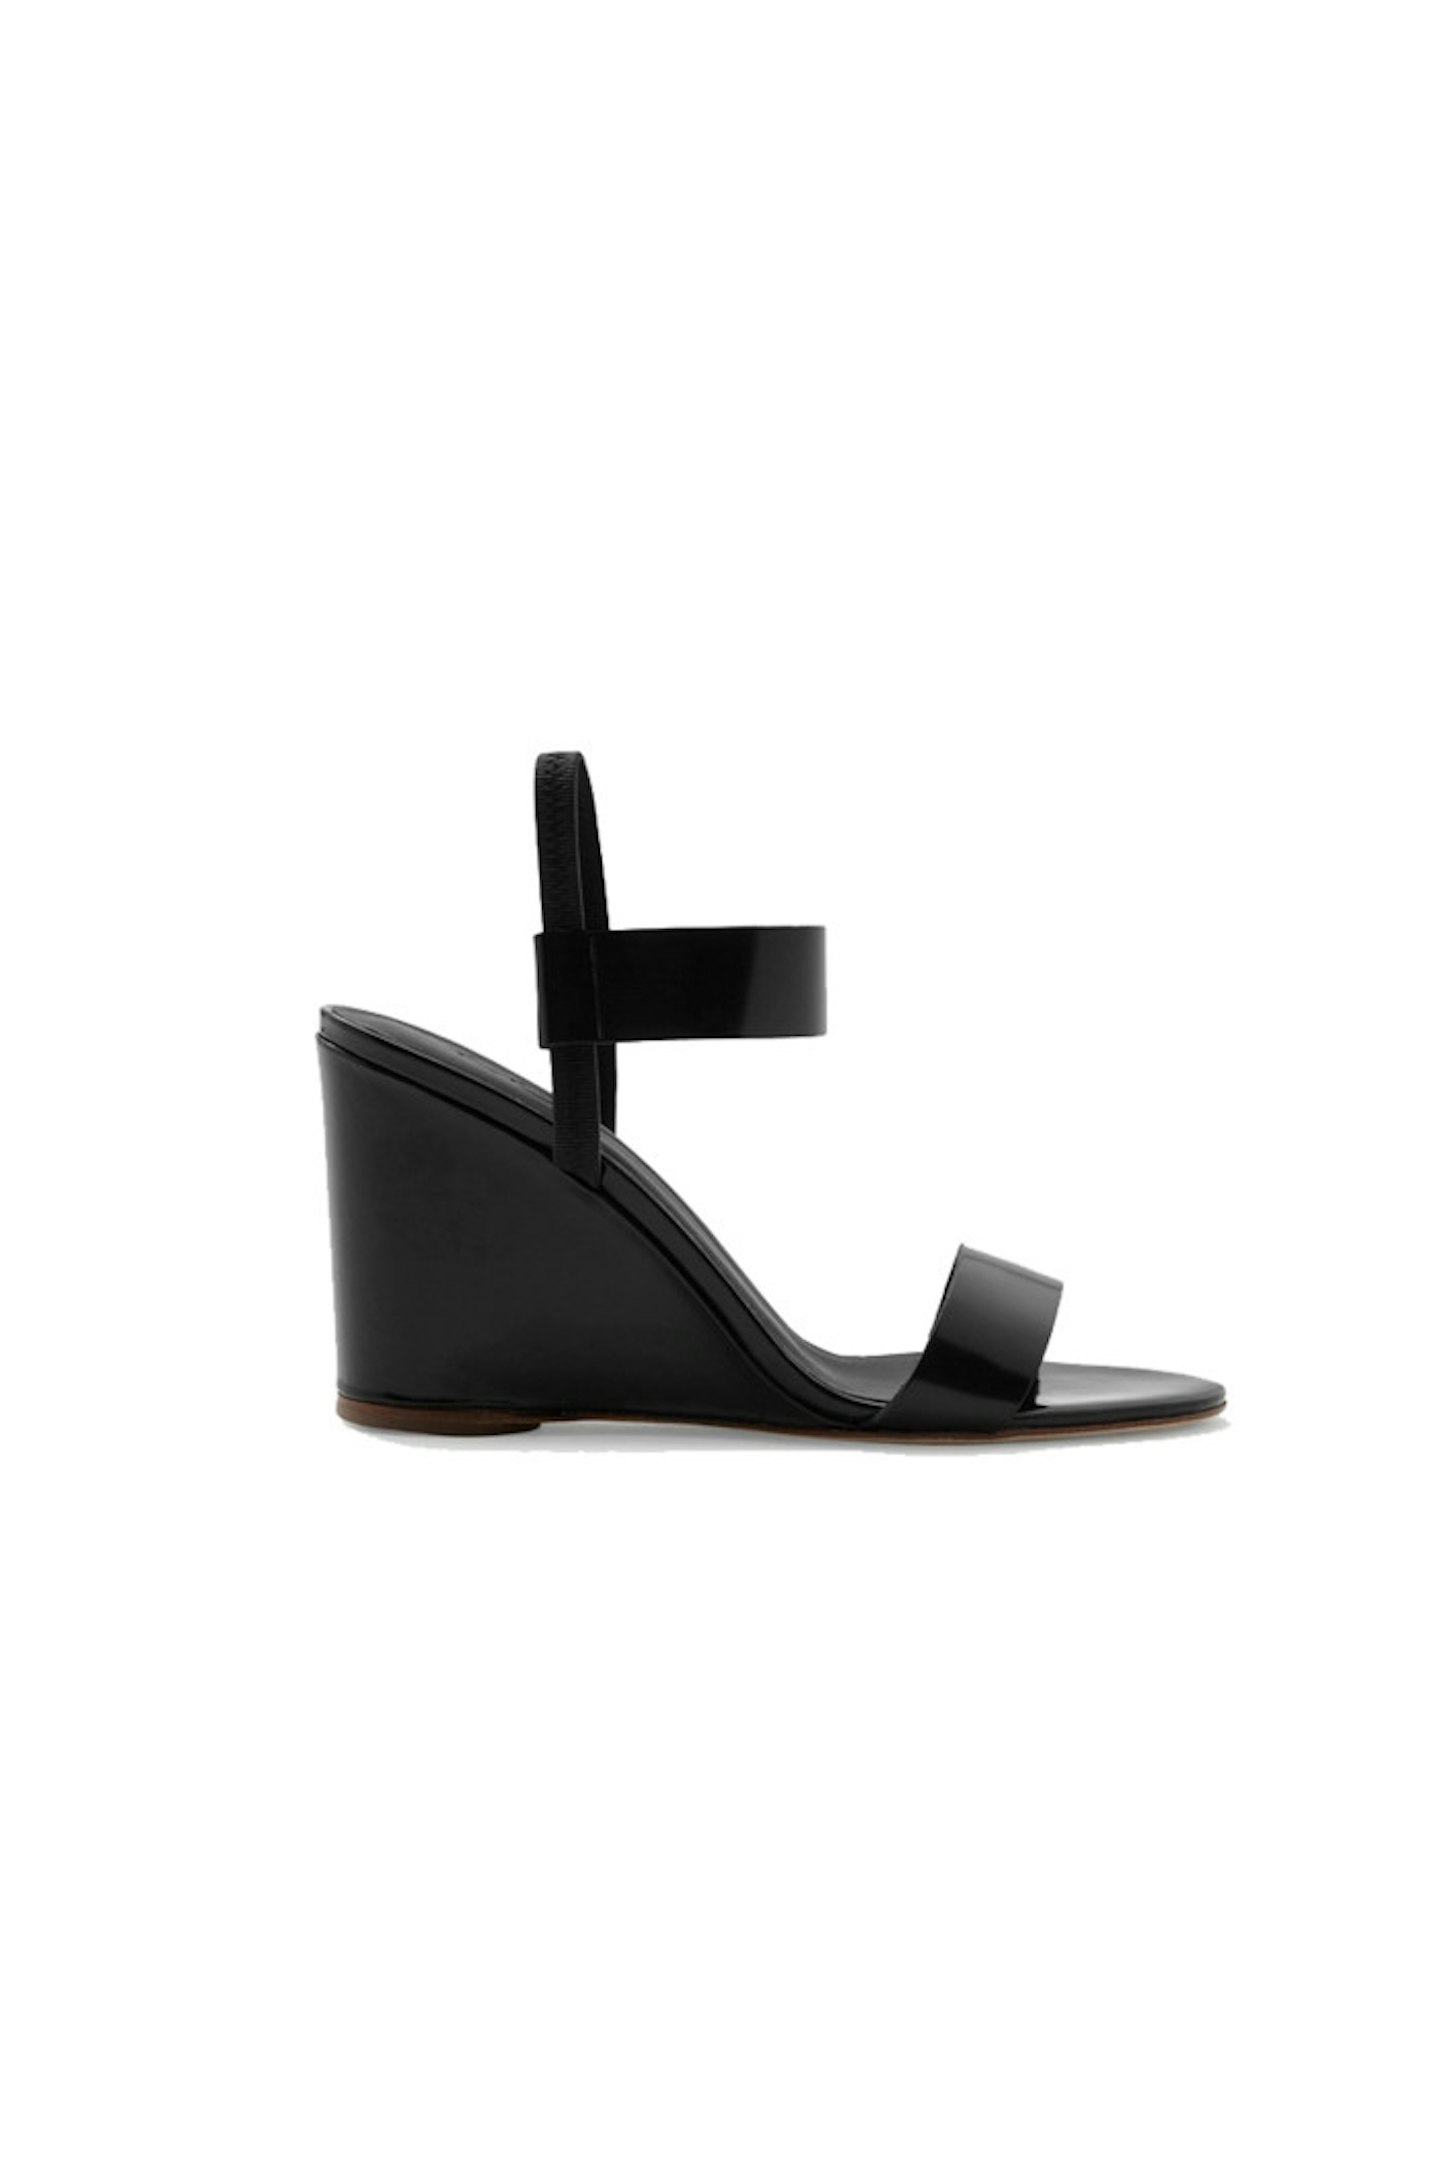 Buy as many crazy and fun shoes as you like but every woman needs a pair of simple black sandals like these in their wardrobe. The wedge gives height but is much comfortable to wear all day long than a spindly heel.